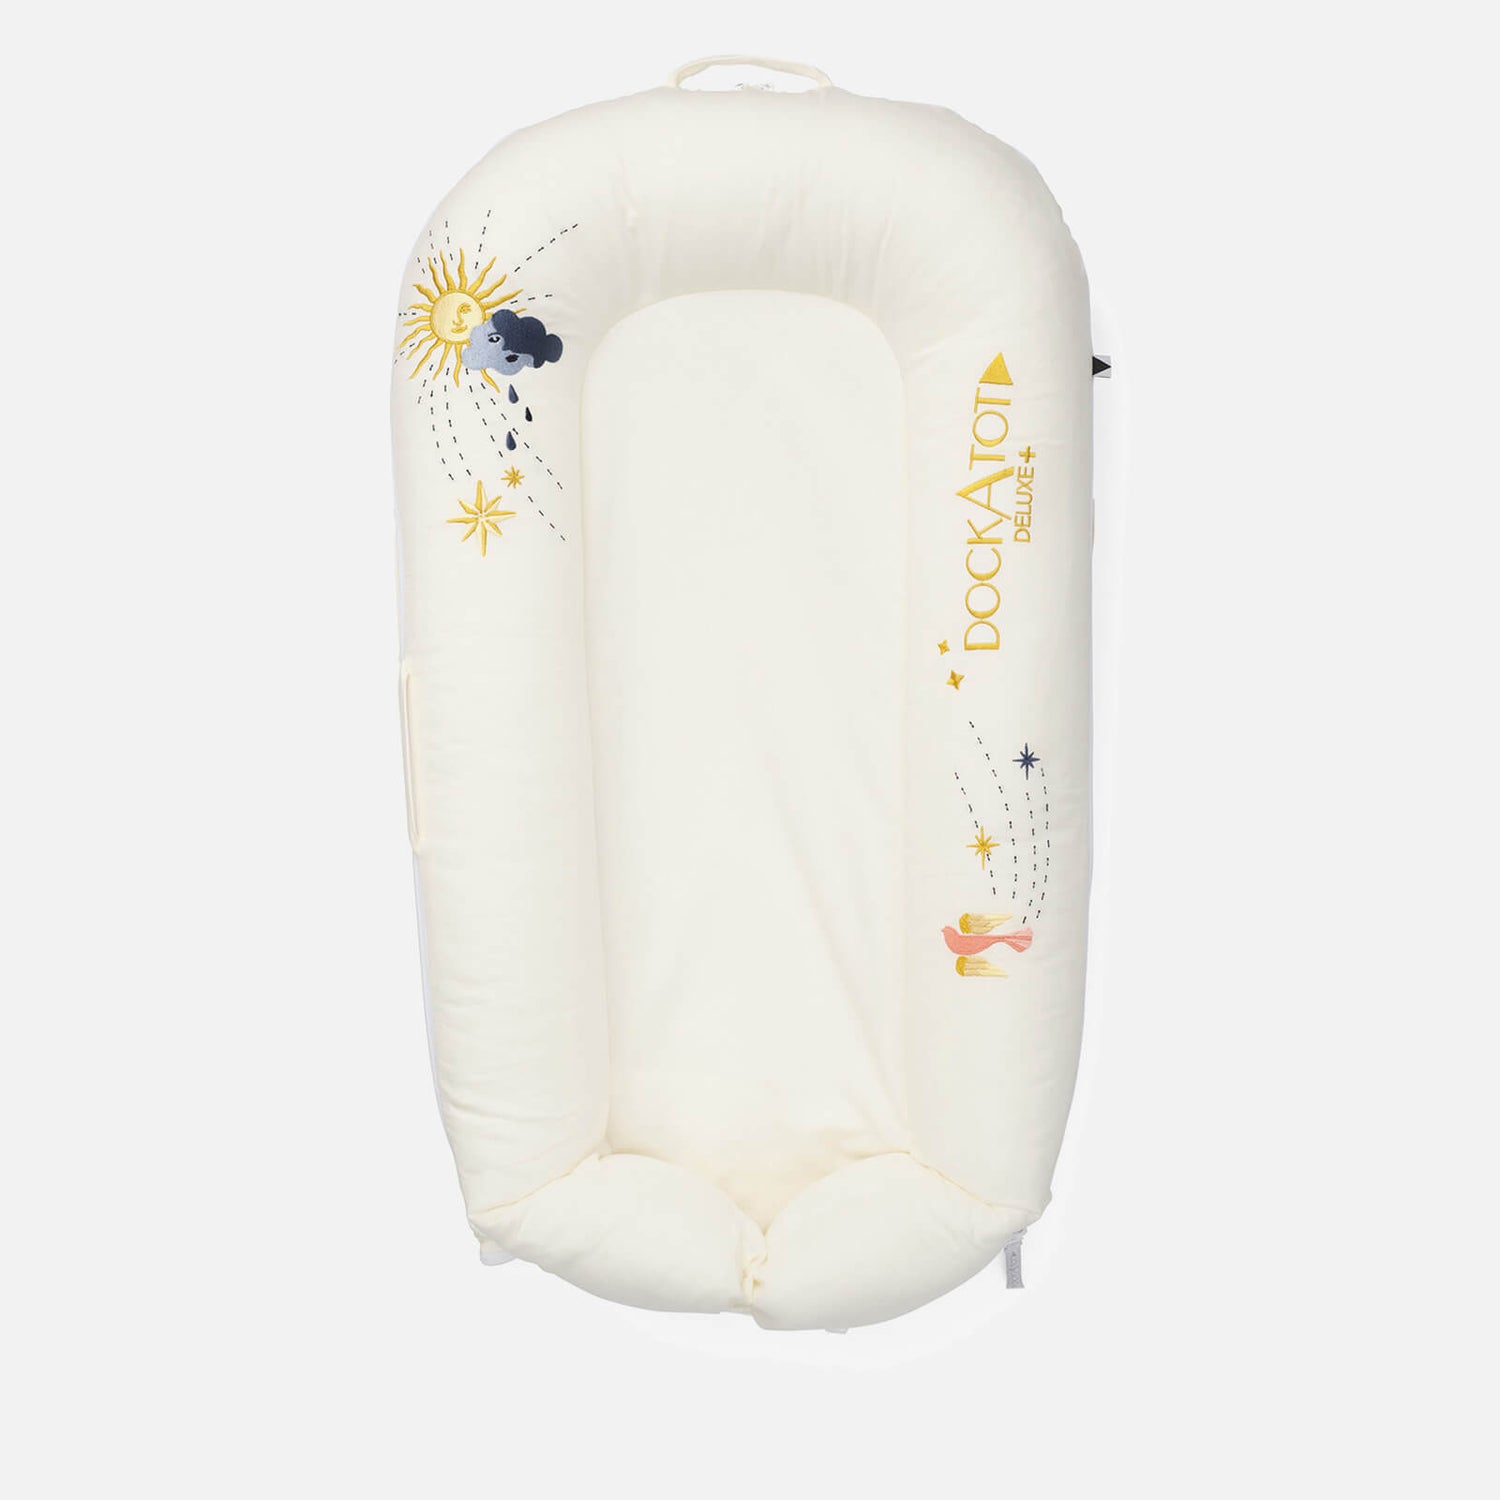 DockATot Deluxe + Pod for 0-8 Months - Embroidered Skies